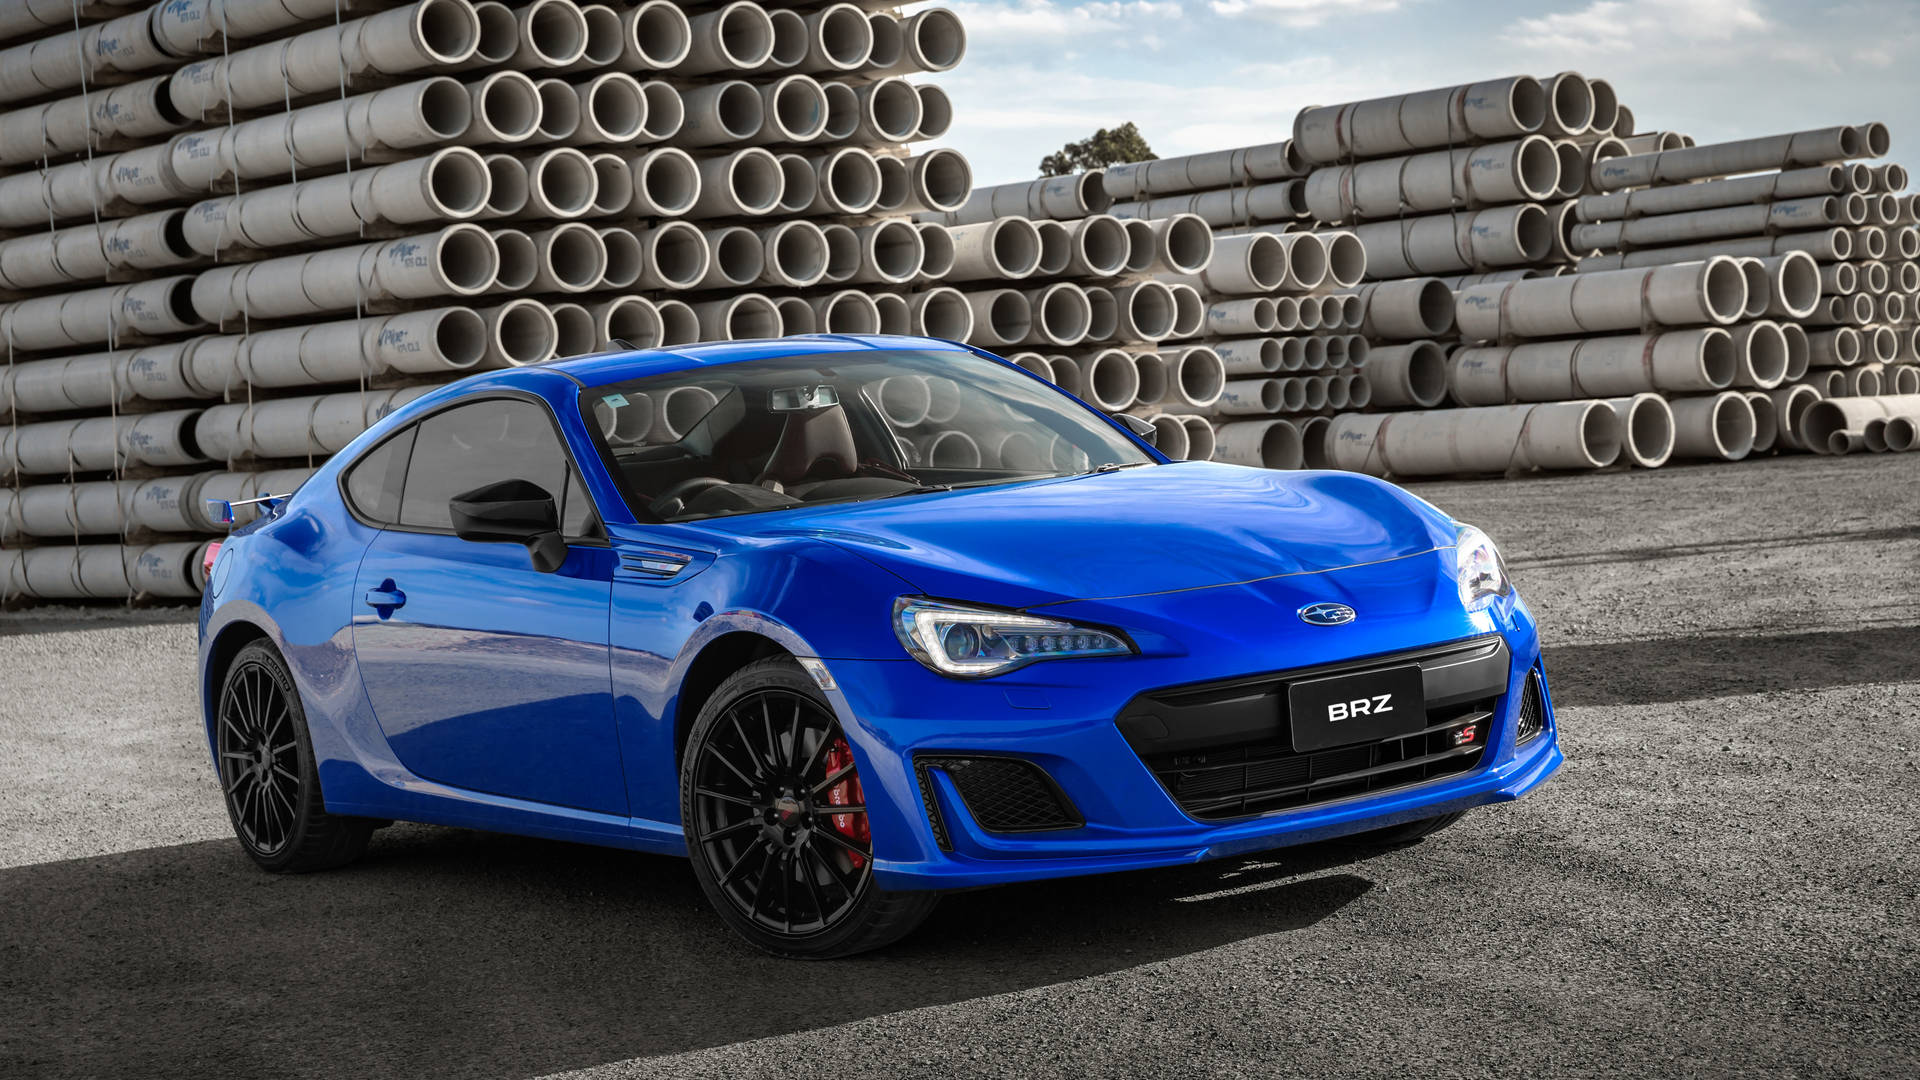 Brz Driving By Pipes Wallpaper